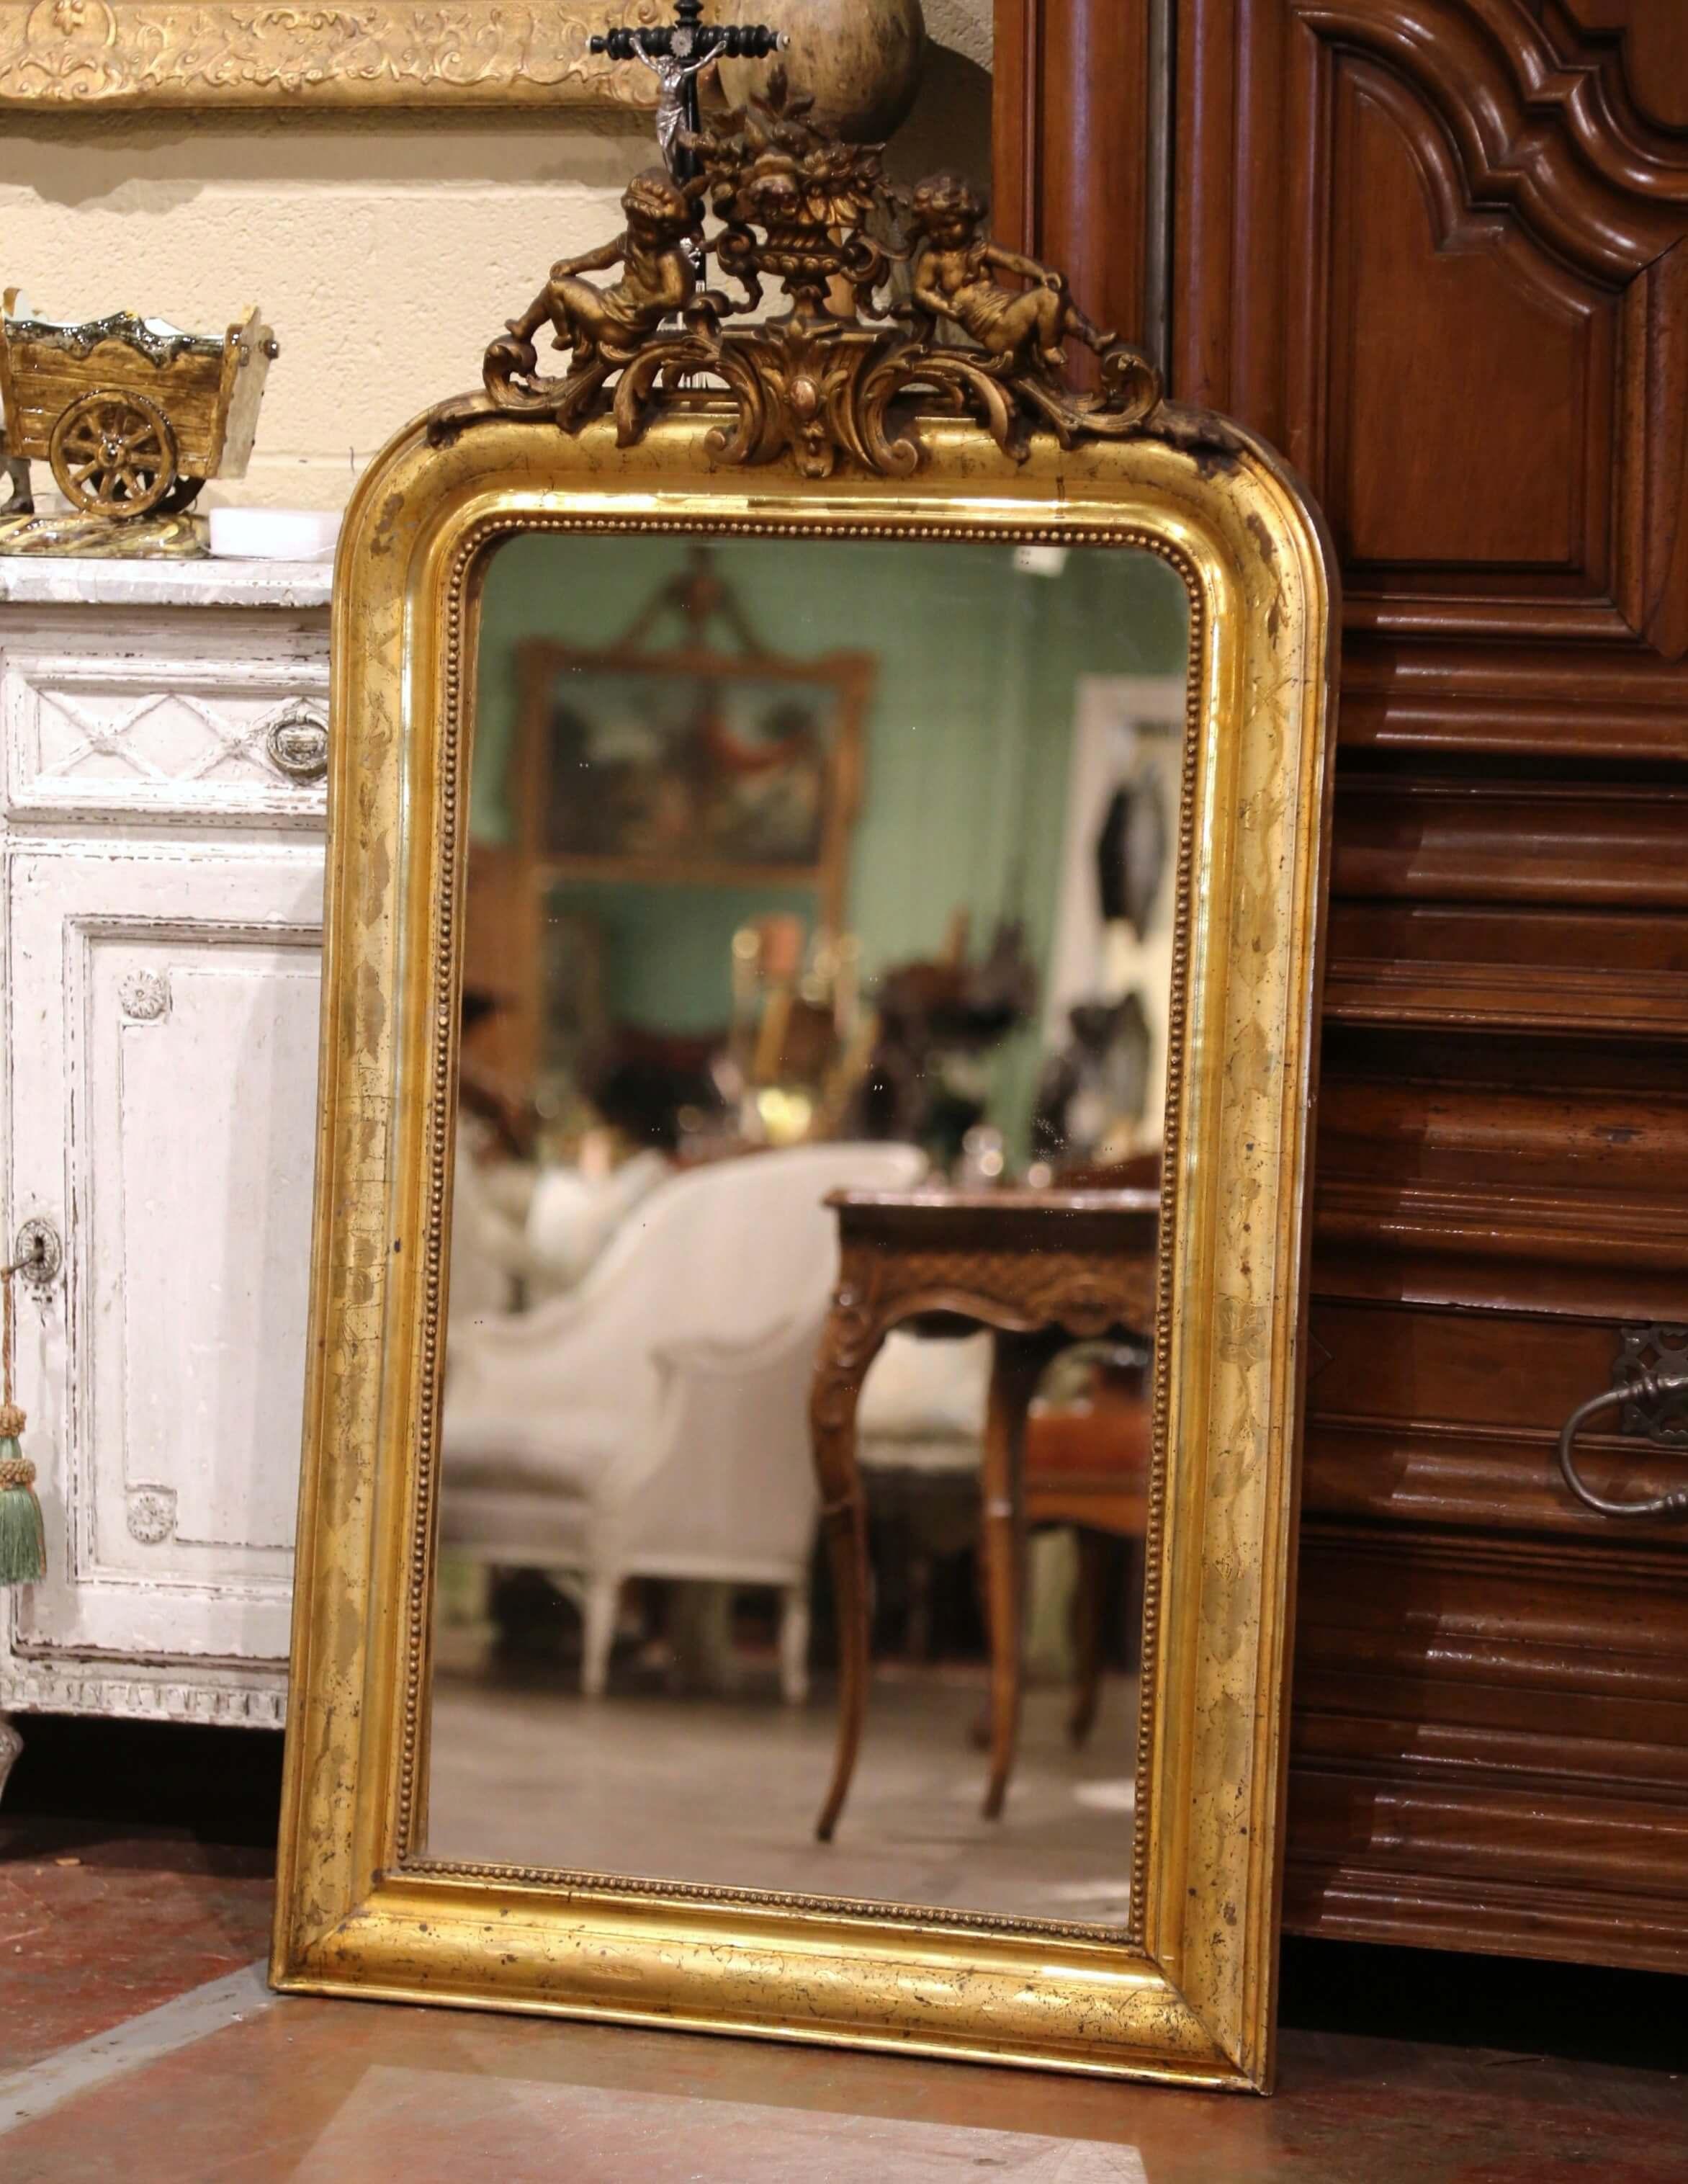 Decorate a powder room with this elegant antique gilt mirror! Crafted in France, circa 1870, the mirror is decorated at the pediment with a flower vase cartouche in the center flanked by a pair of carved cherub figures. The gilt frame, dressed with